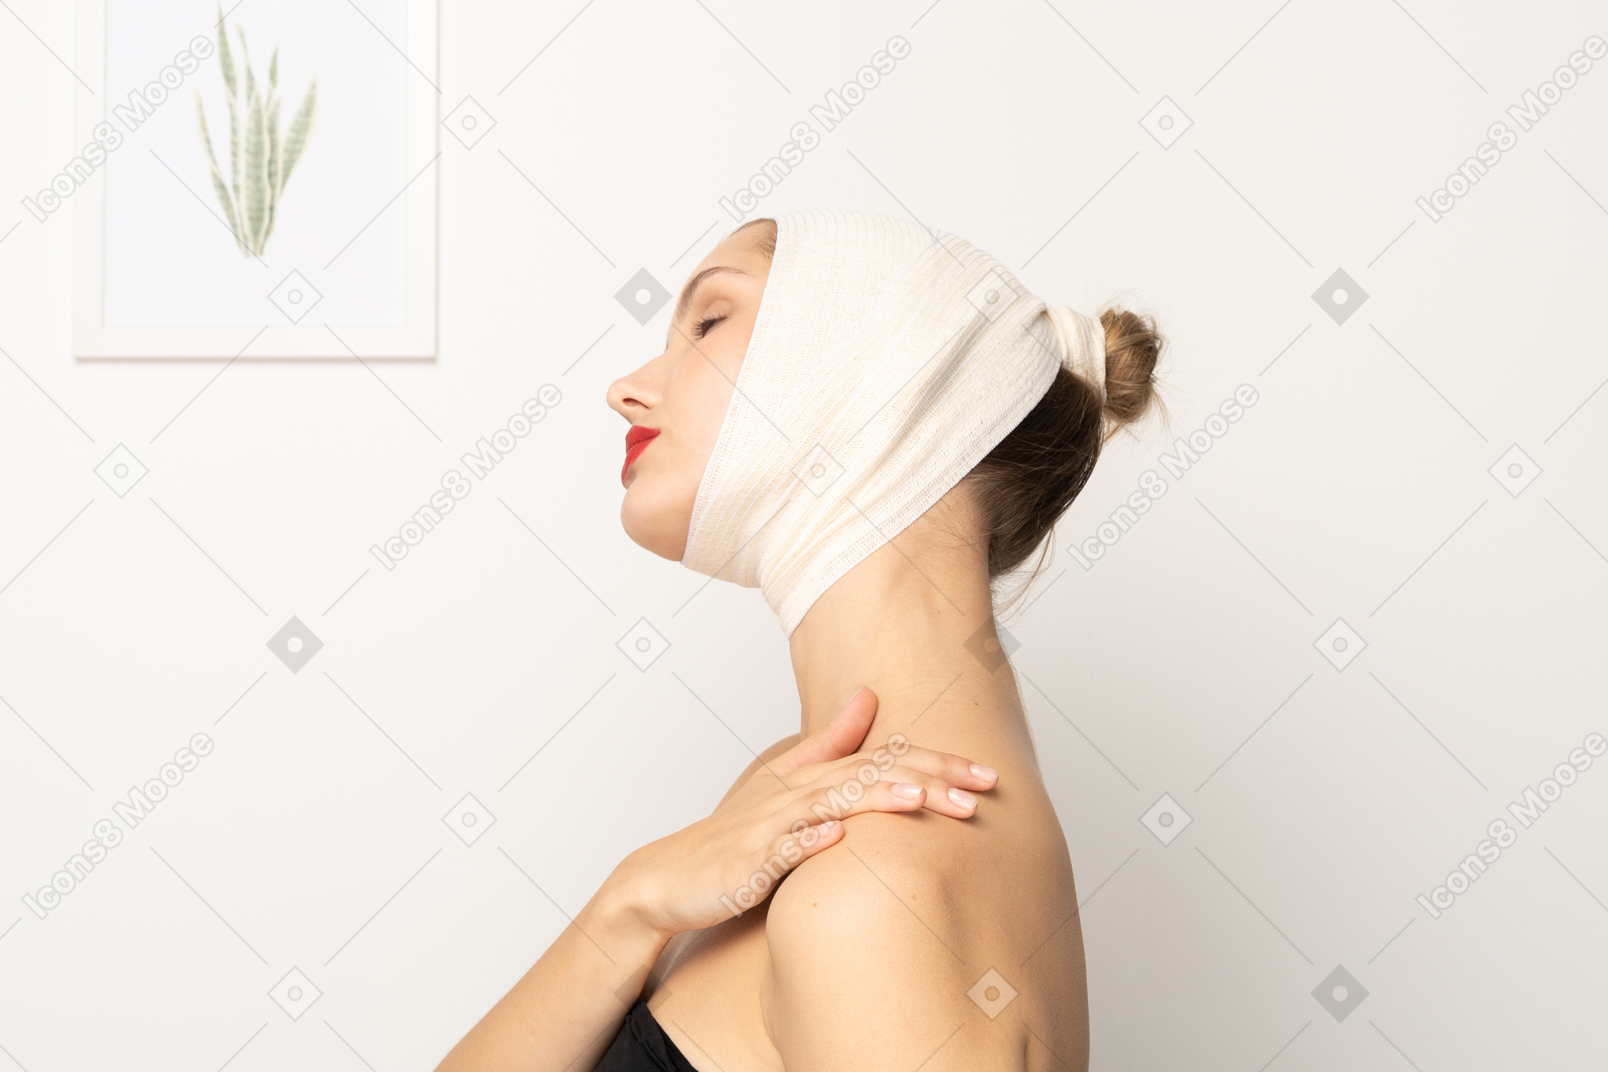 Woman with head bandage touching her shoulder